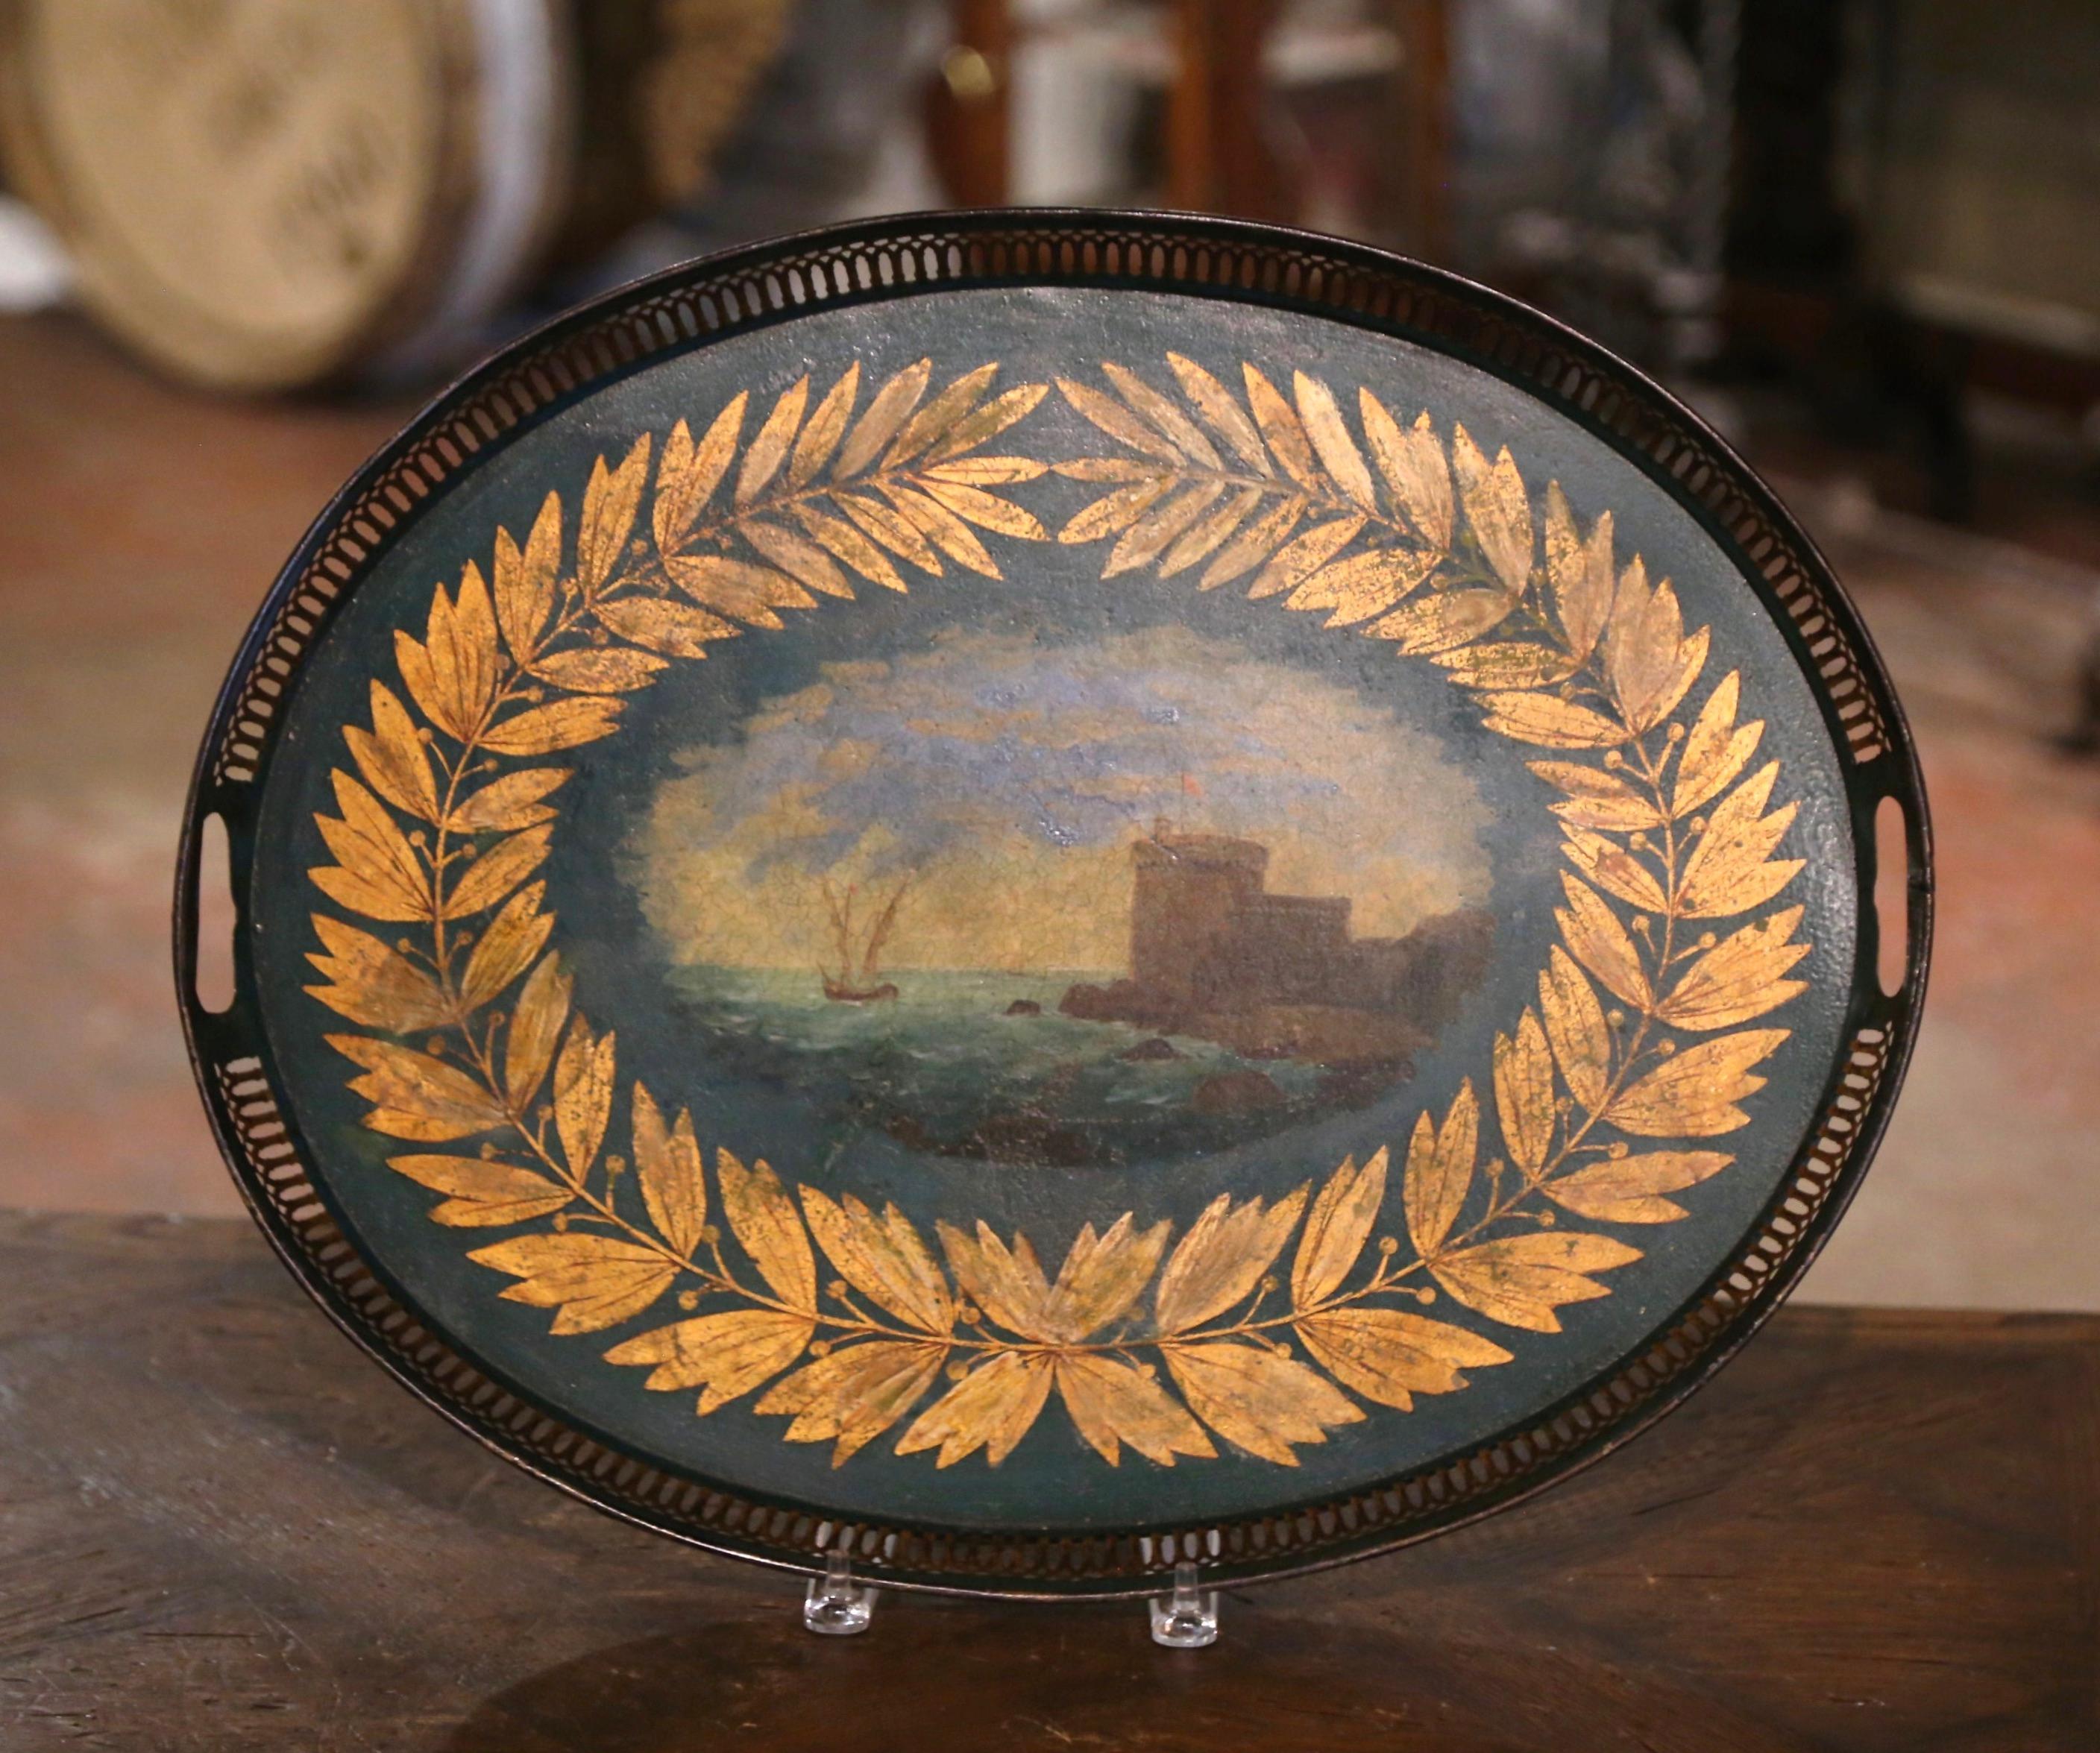 Decorate a coffee table with this elegant and beautiful antique tray. Crafted in France, circa 1870 and oval in shape, the colorful tray features side handles over a pierced gallery around the edges. The center medallion depicts an illustrated,